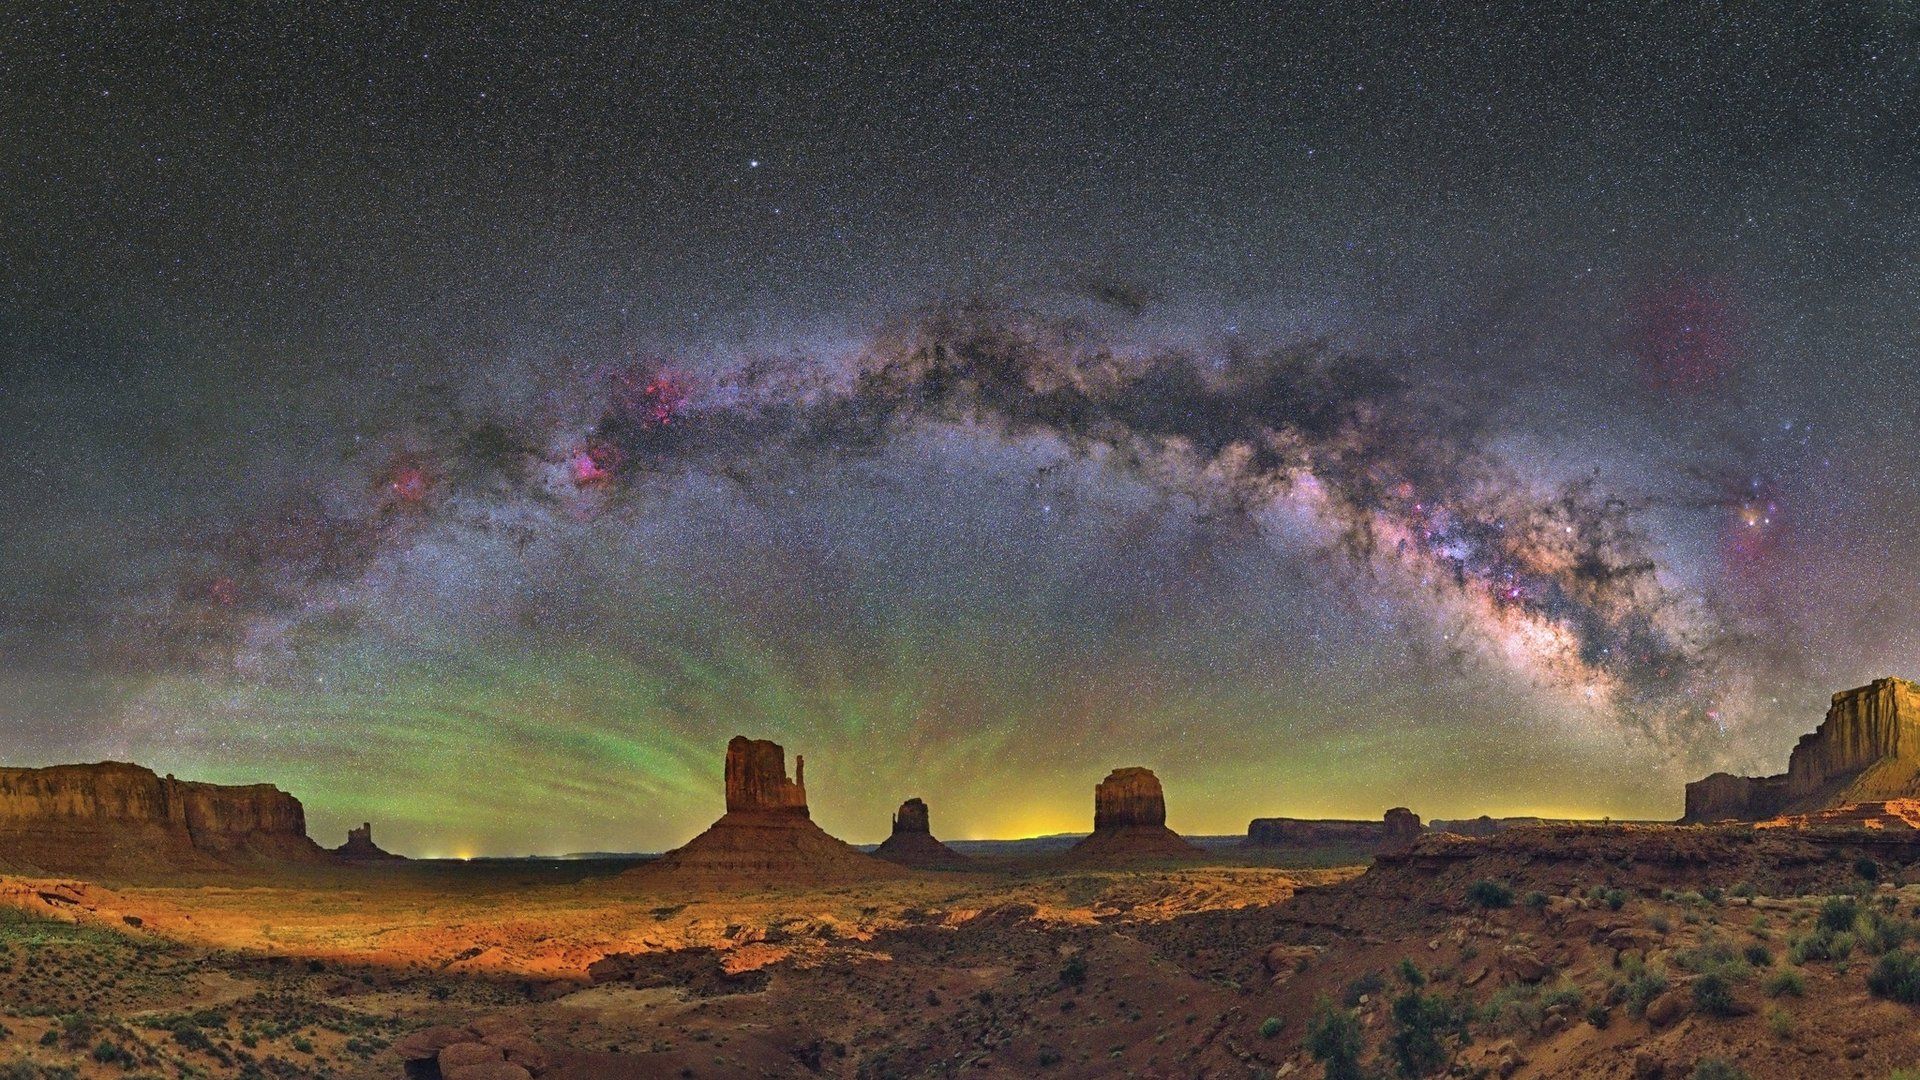 General 1920x1080 Milky Way starscape skyscape sky astronomy Monument Valley